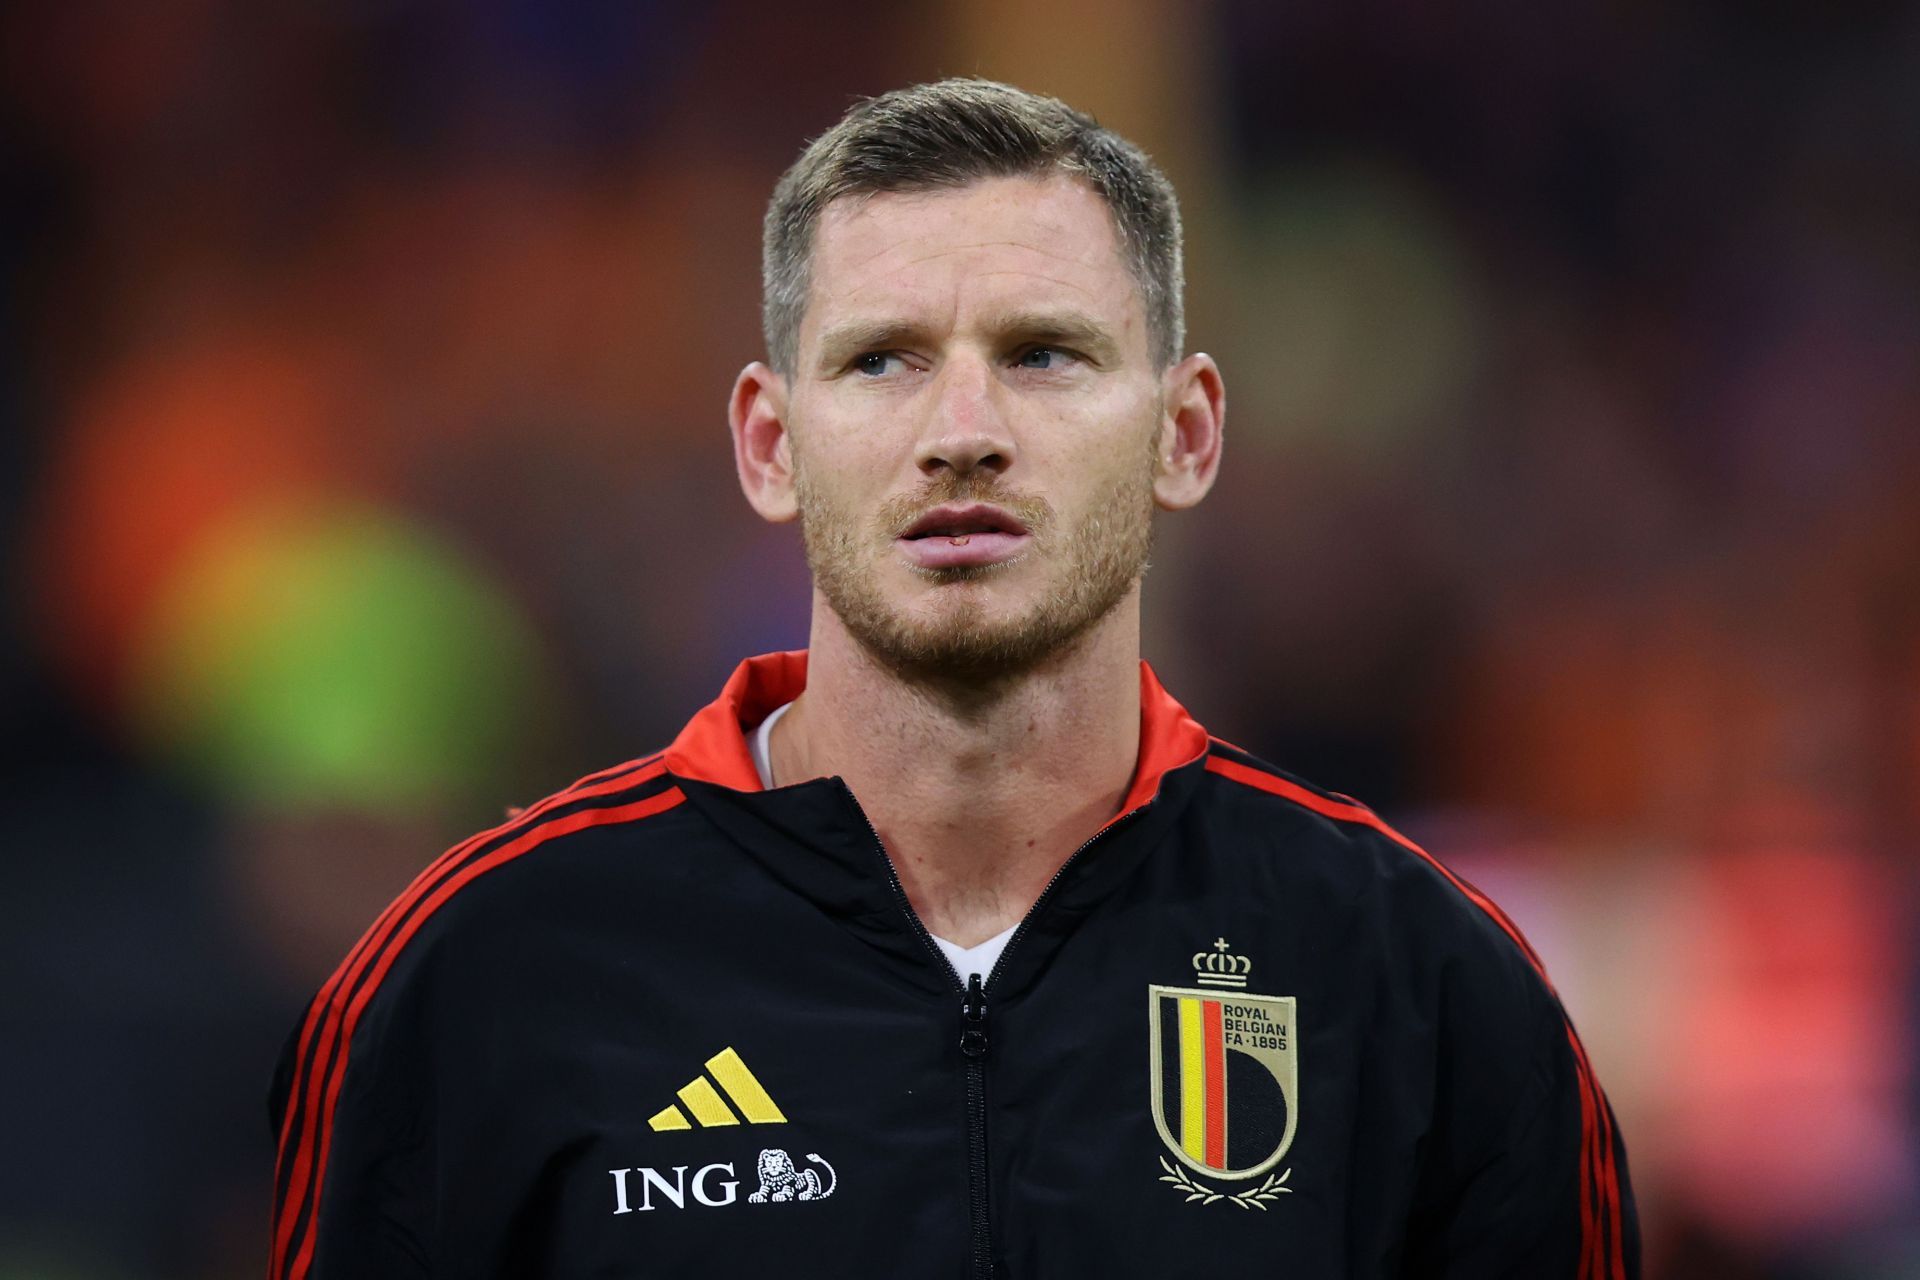 Jan Vertonghen brings plenty of experience and defensive solidity to the table for Belgium